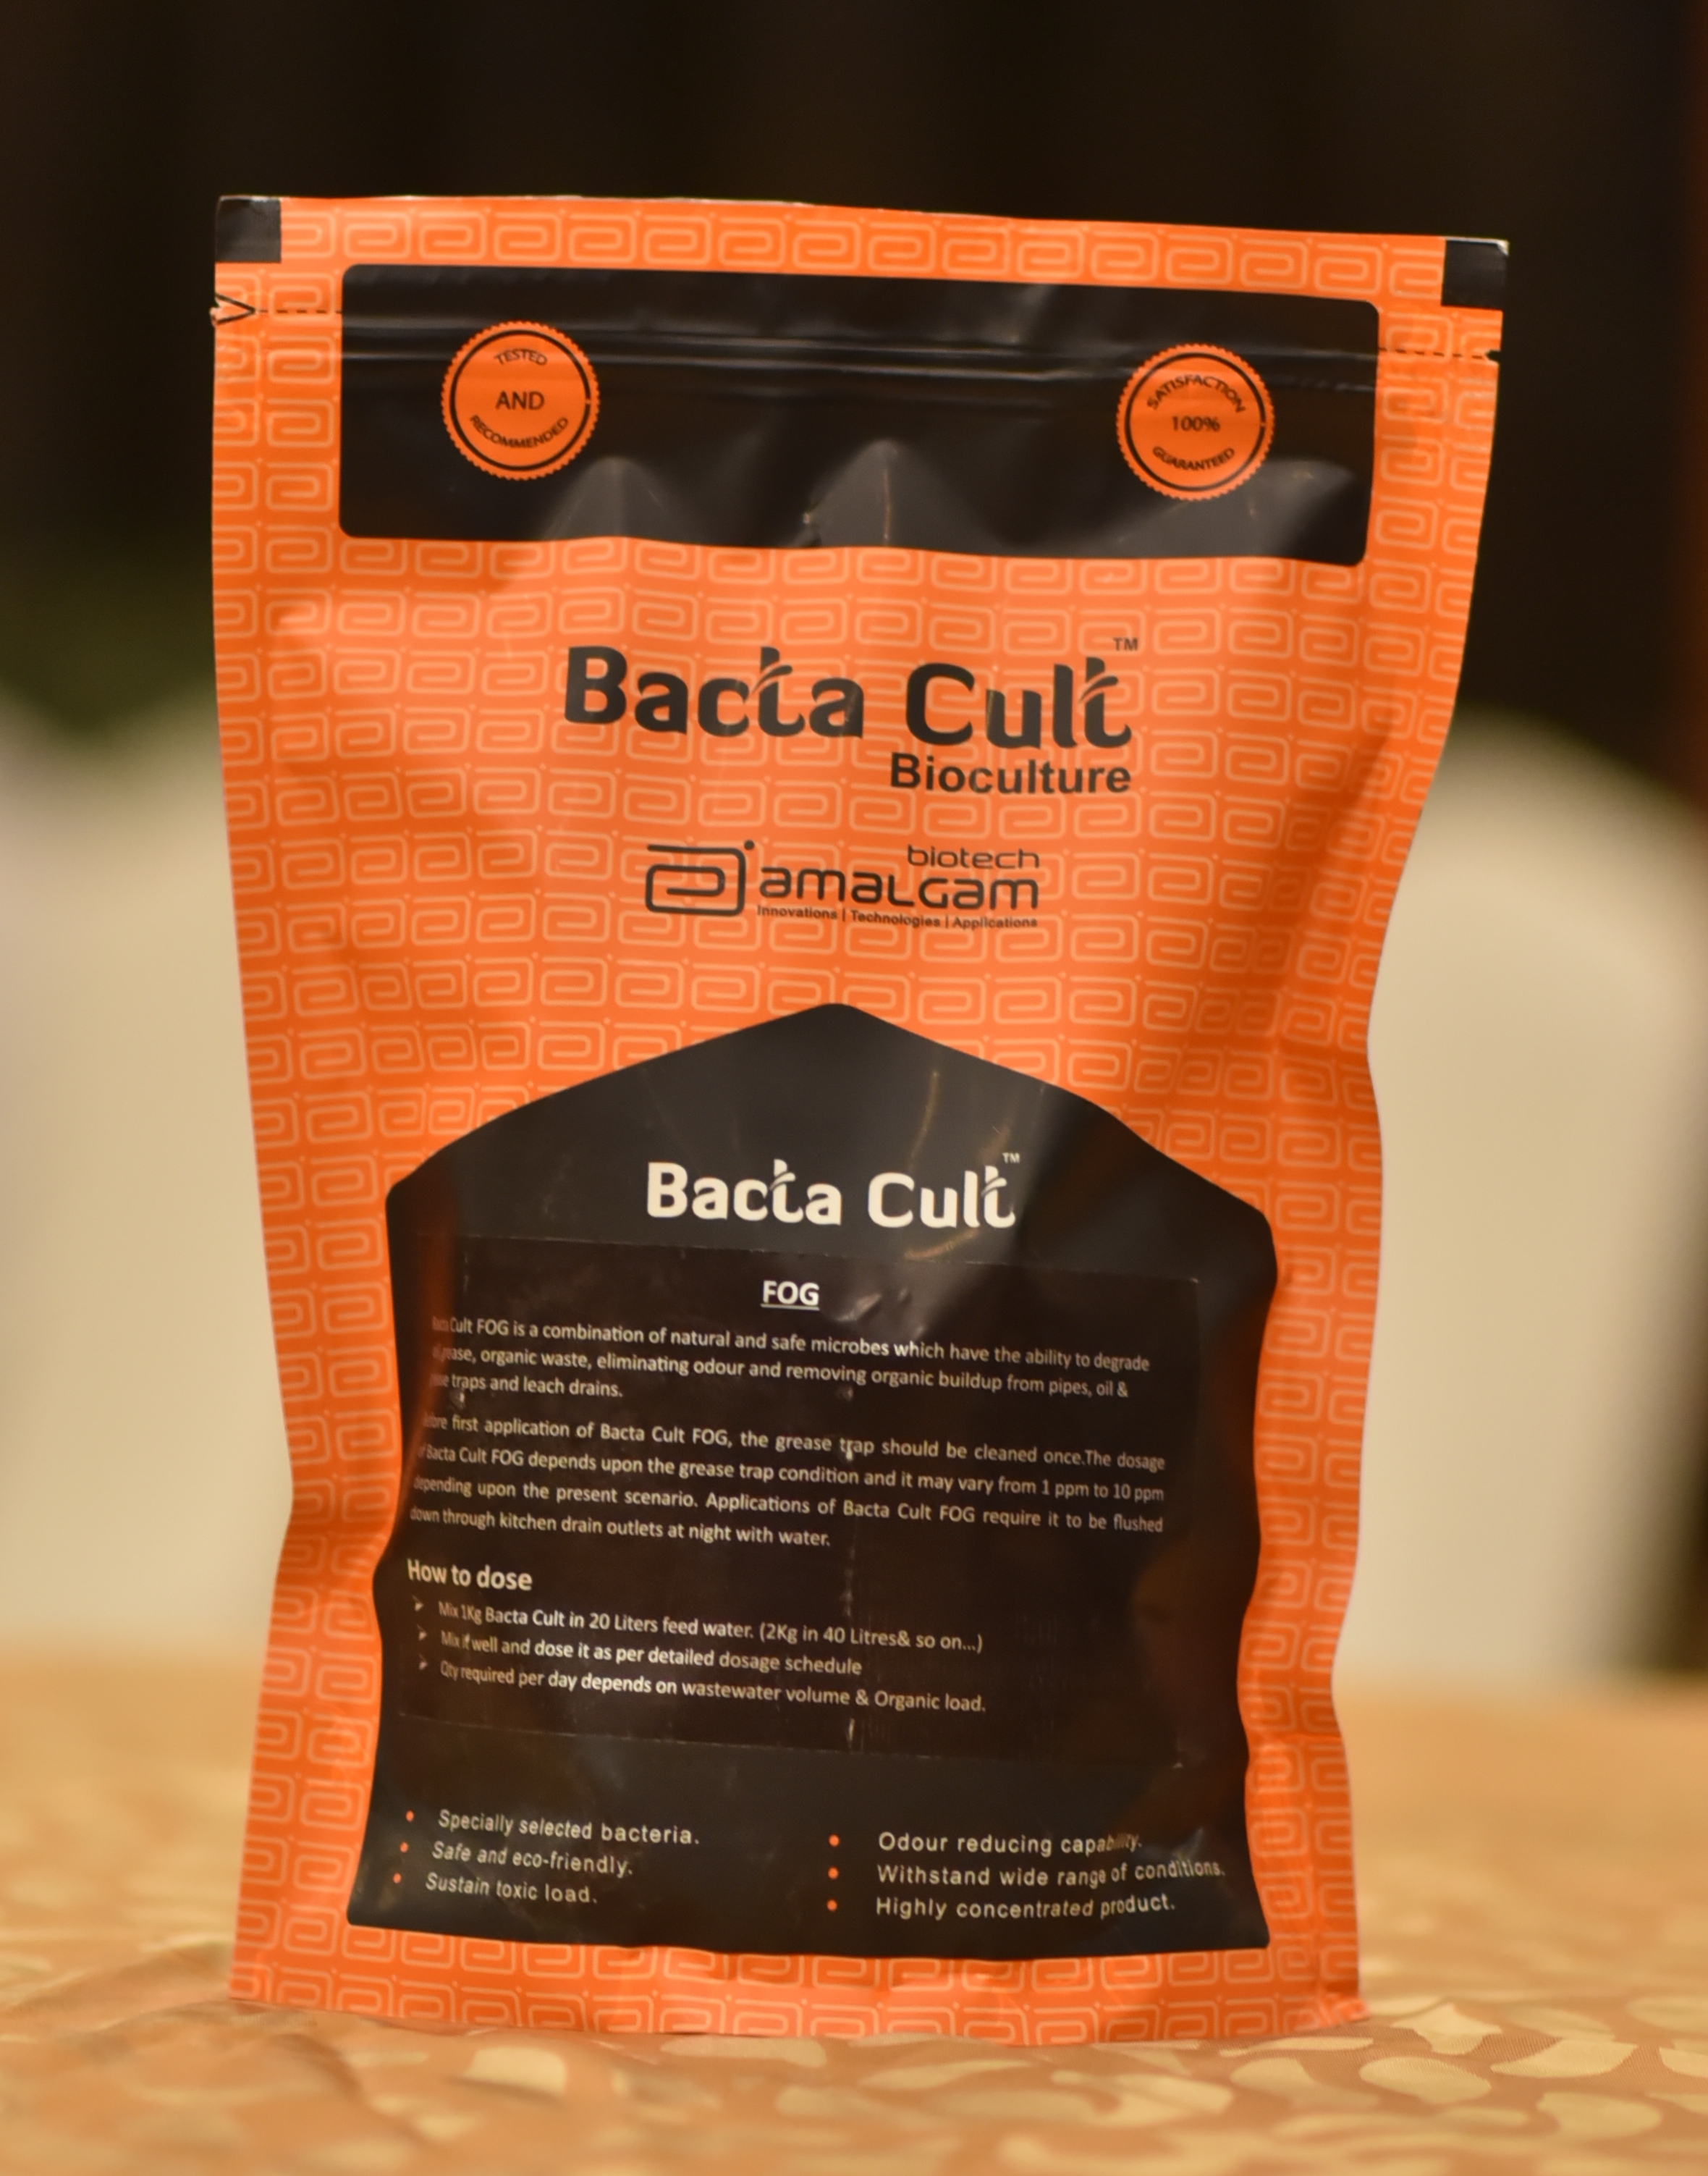 Bactacult Bioculture FOG oil and grease